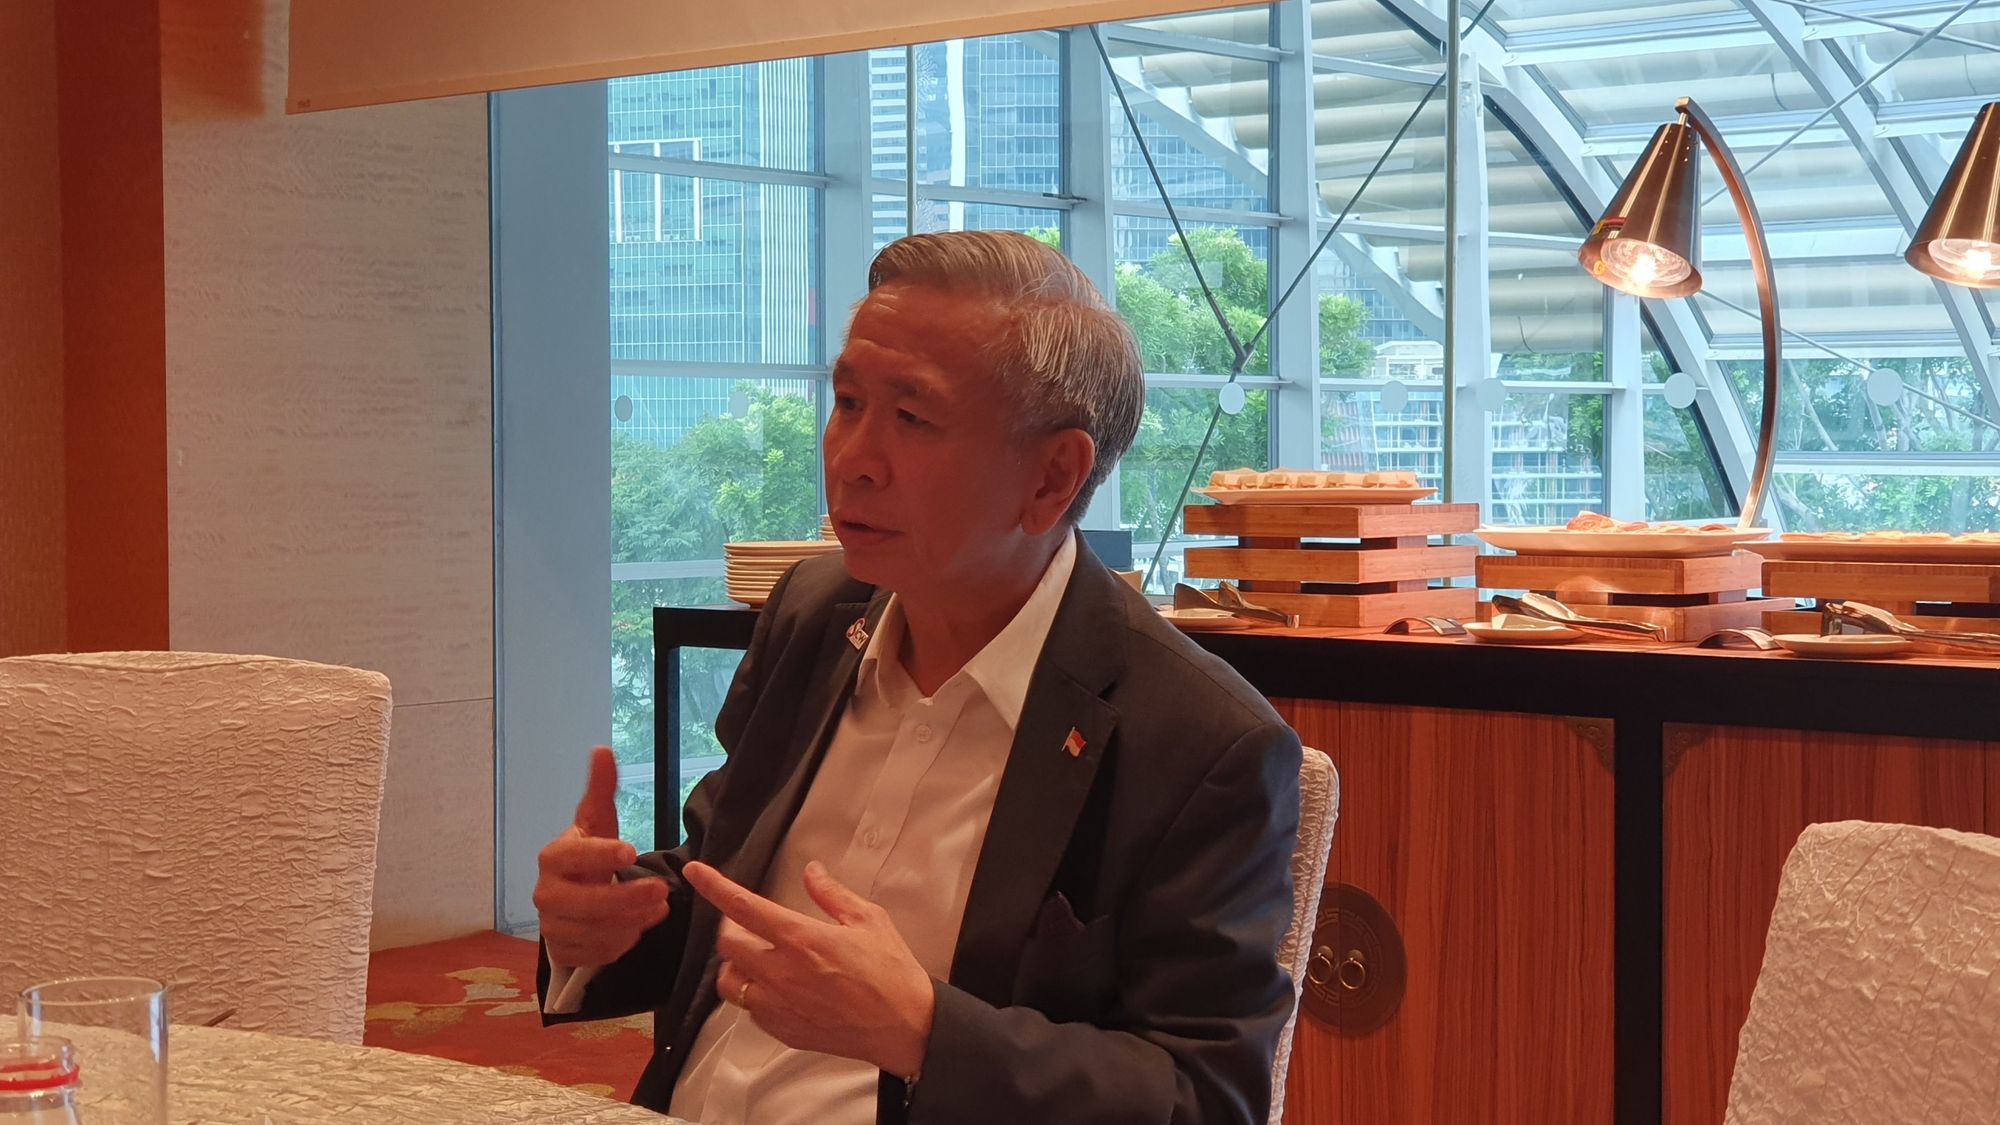 1019 2 - Scams present significant security challenges to Singaporeans, cybersecurity chief asserts